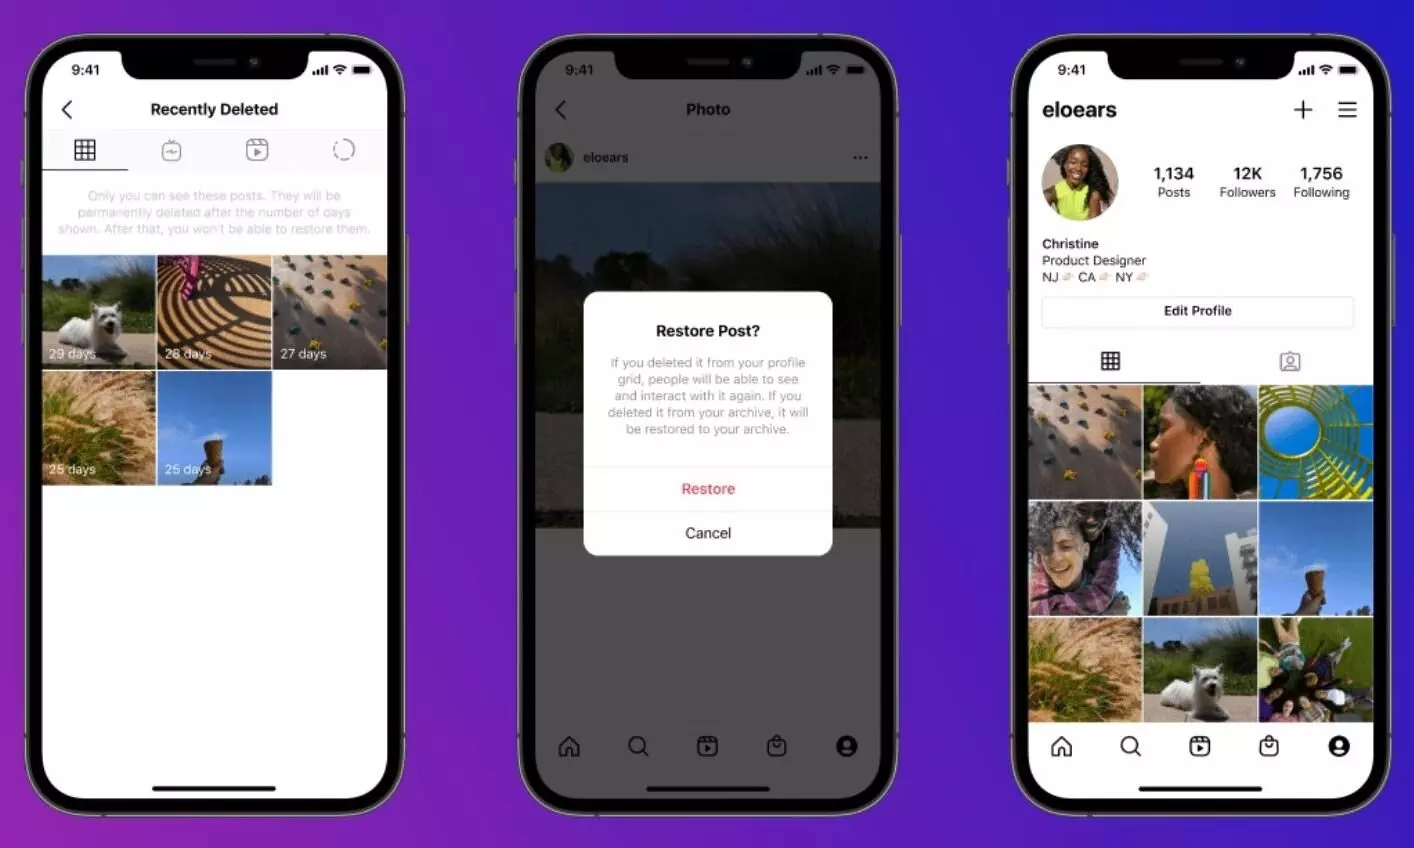 Instagrammers can now review and restore deleted content